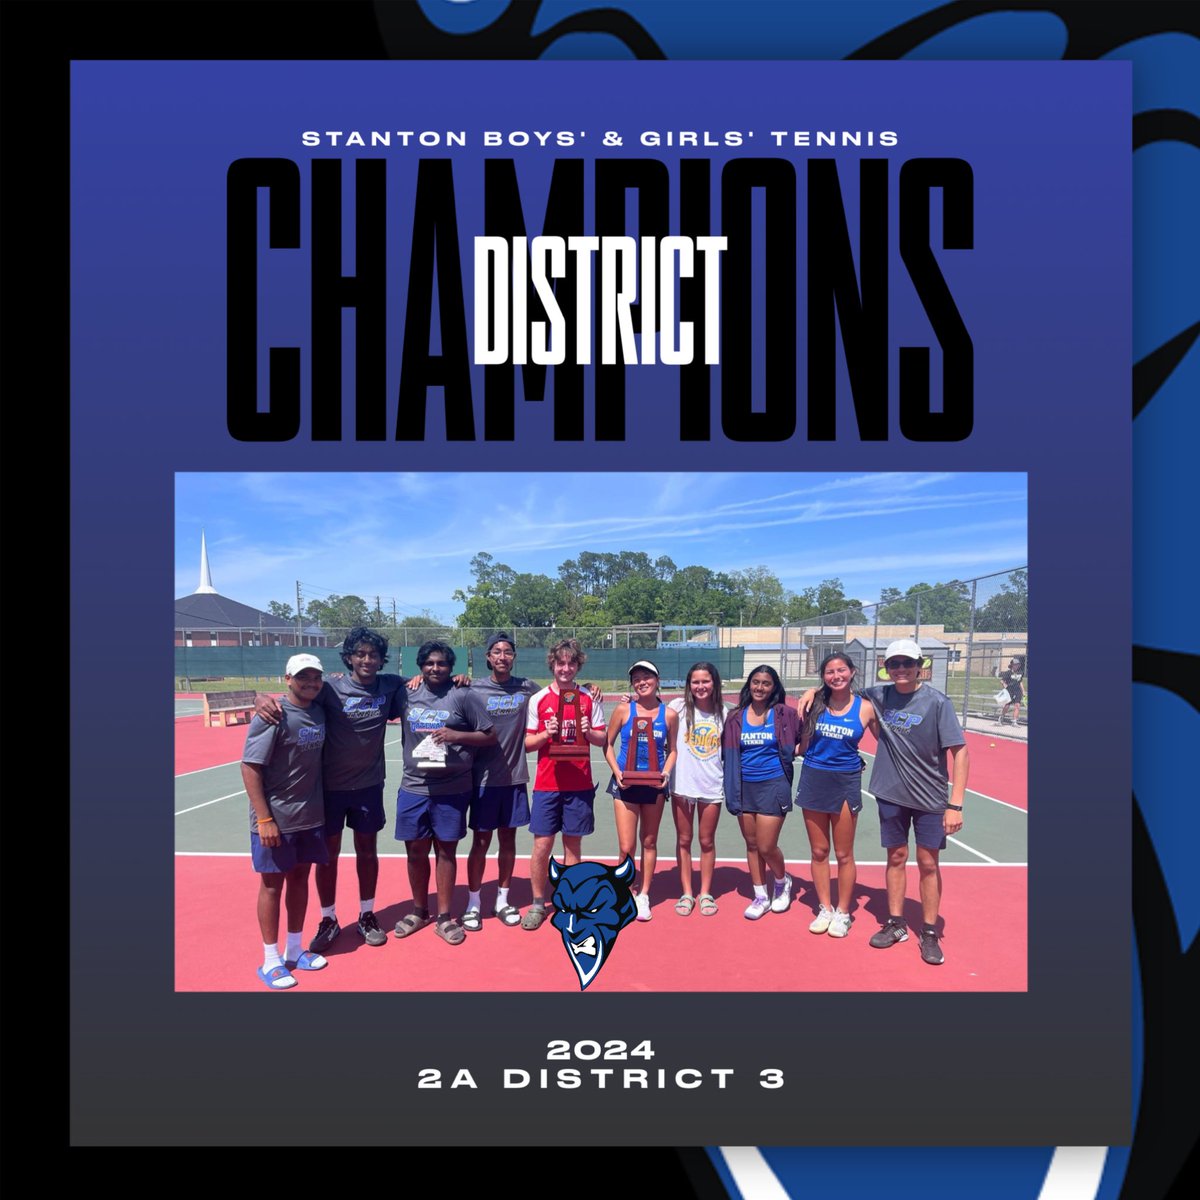 Congratulations to both the Girls’ and Boys’ Tennis teams for taking home the District Championships! Good luck in Regionals and beyond! 😈🎾🏆🥇 #stantonathletics